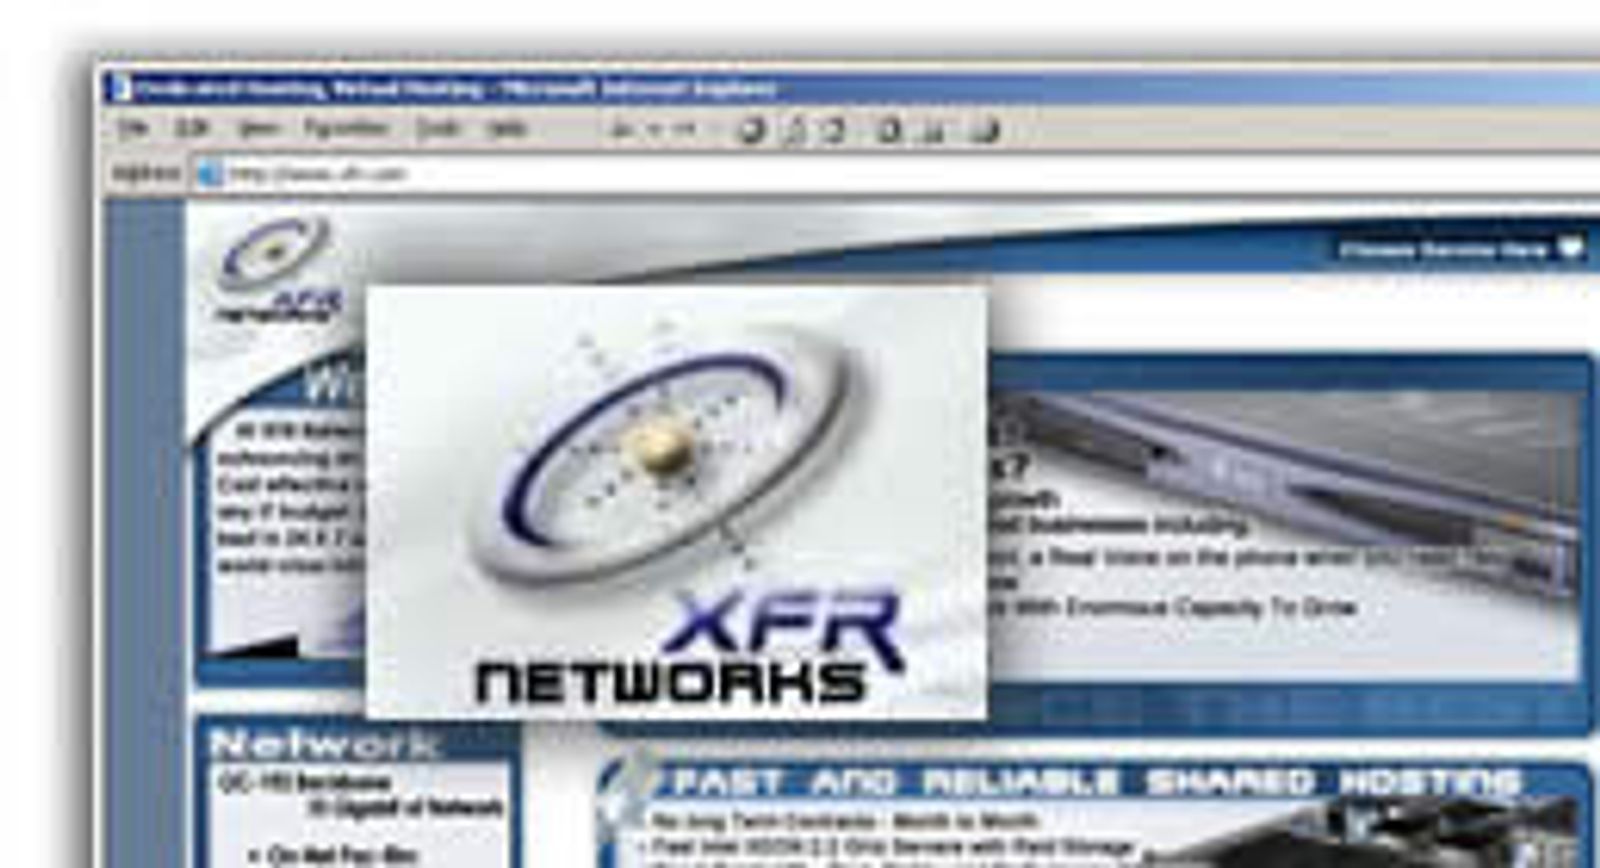 ICS Acquires XFR Networks